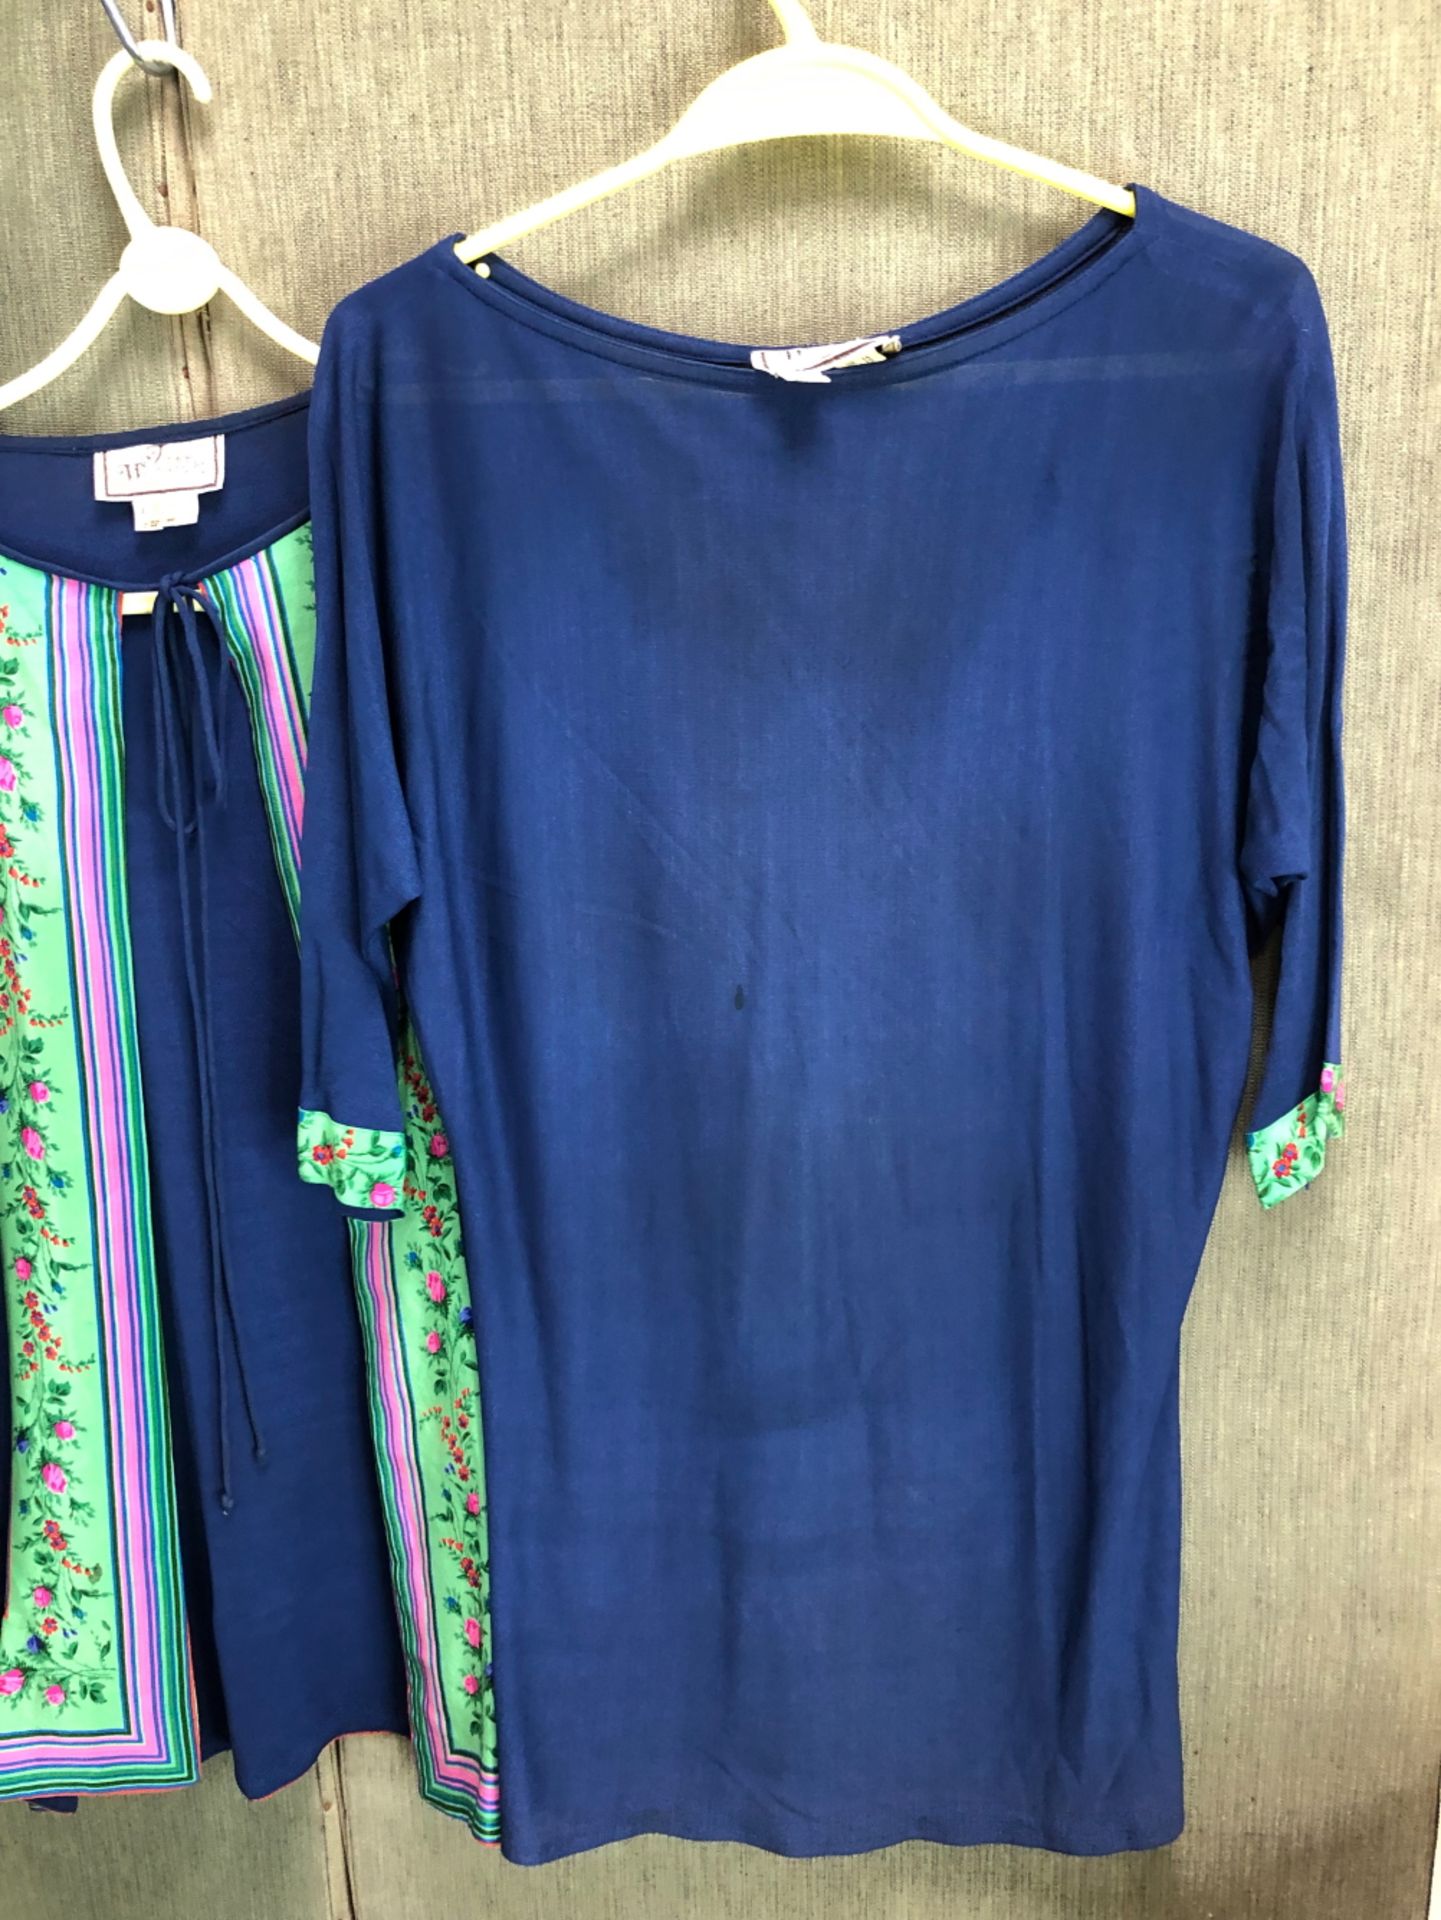 A JANICE WAINWRIGHT UK 14 NAVY AND FLORAL SHEER TUNIC TIE UP TOP WITH MATCHING 3/4 SLEEVE TOP - Bild 7 aus 11